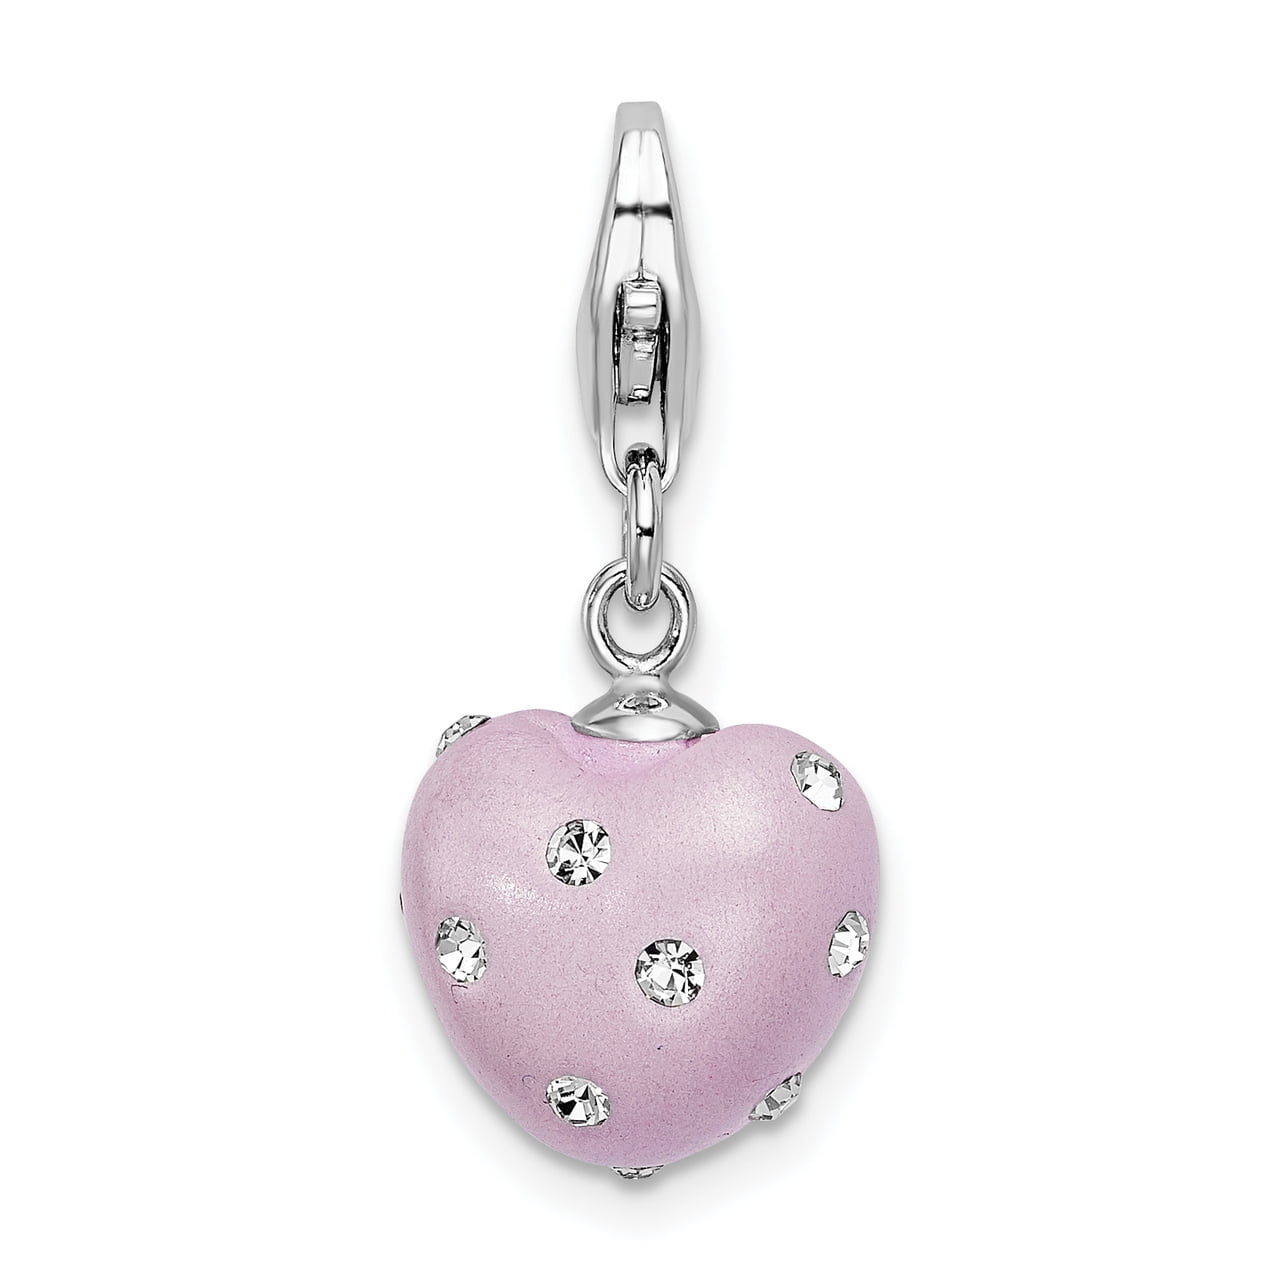 Top 10 Jewelry Gift Sterling Silver Click-on White Ferido & Stellux Crystal Ball Charm